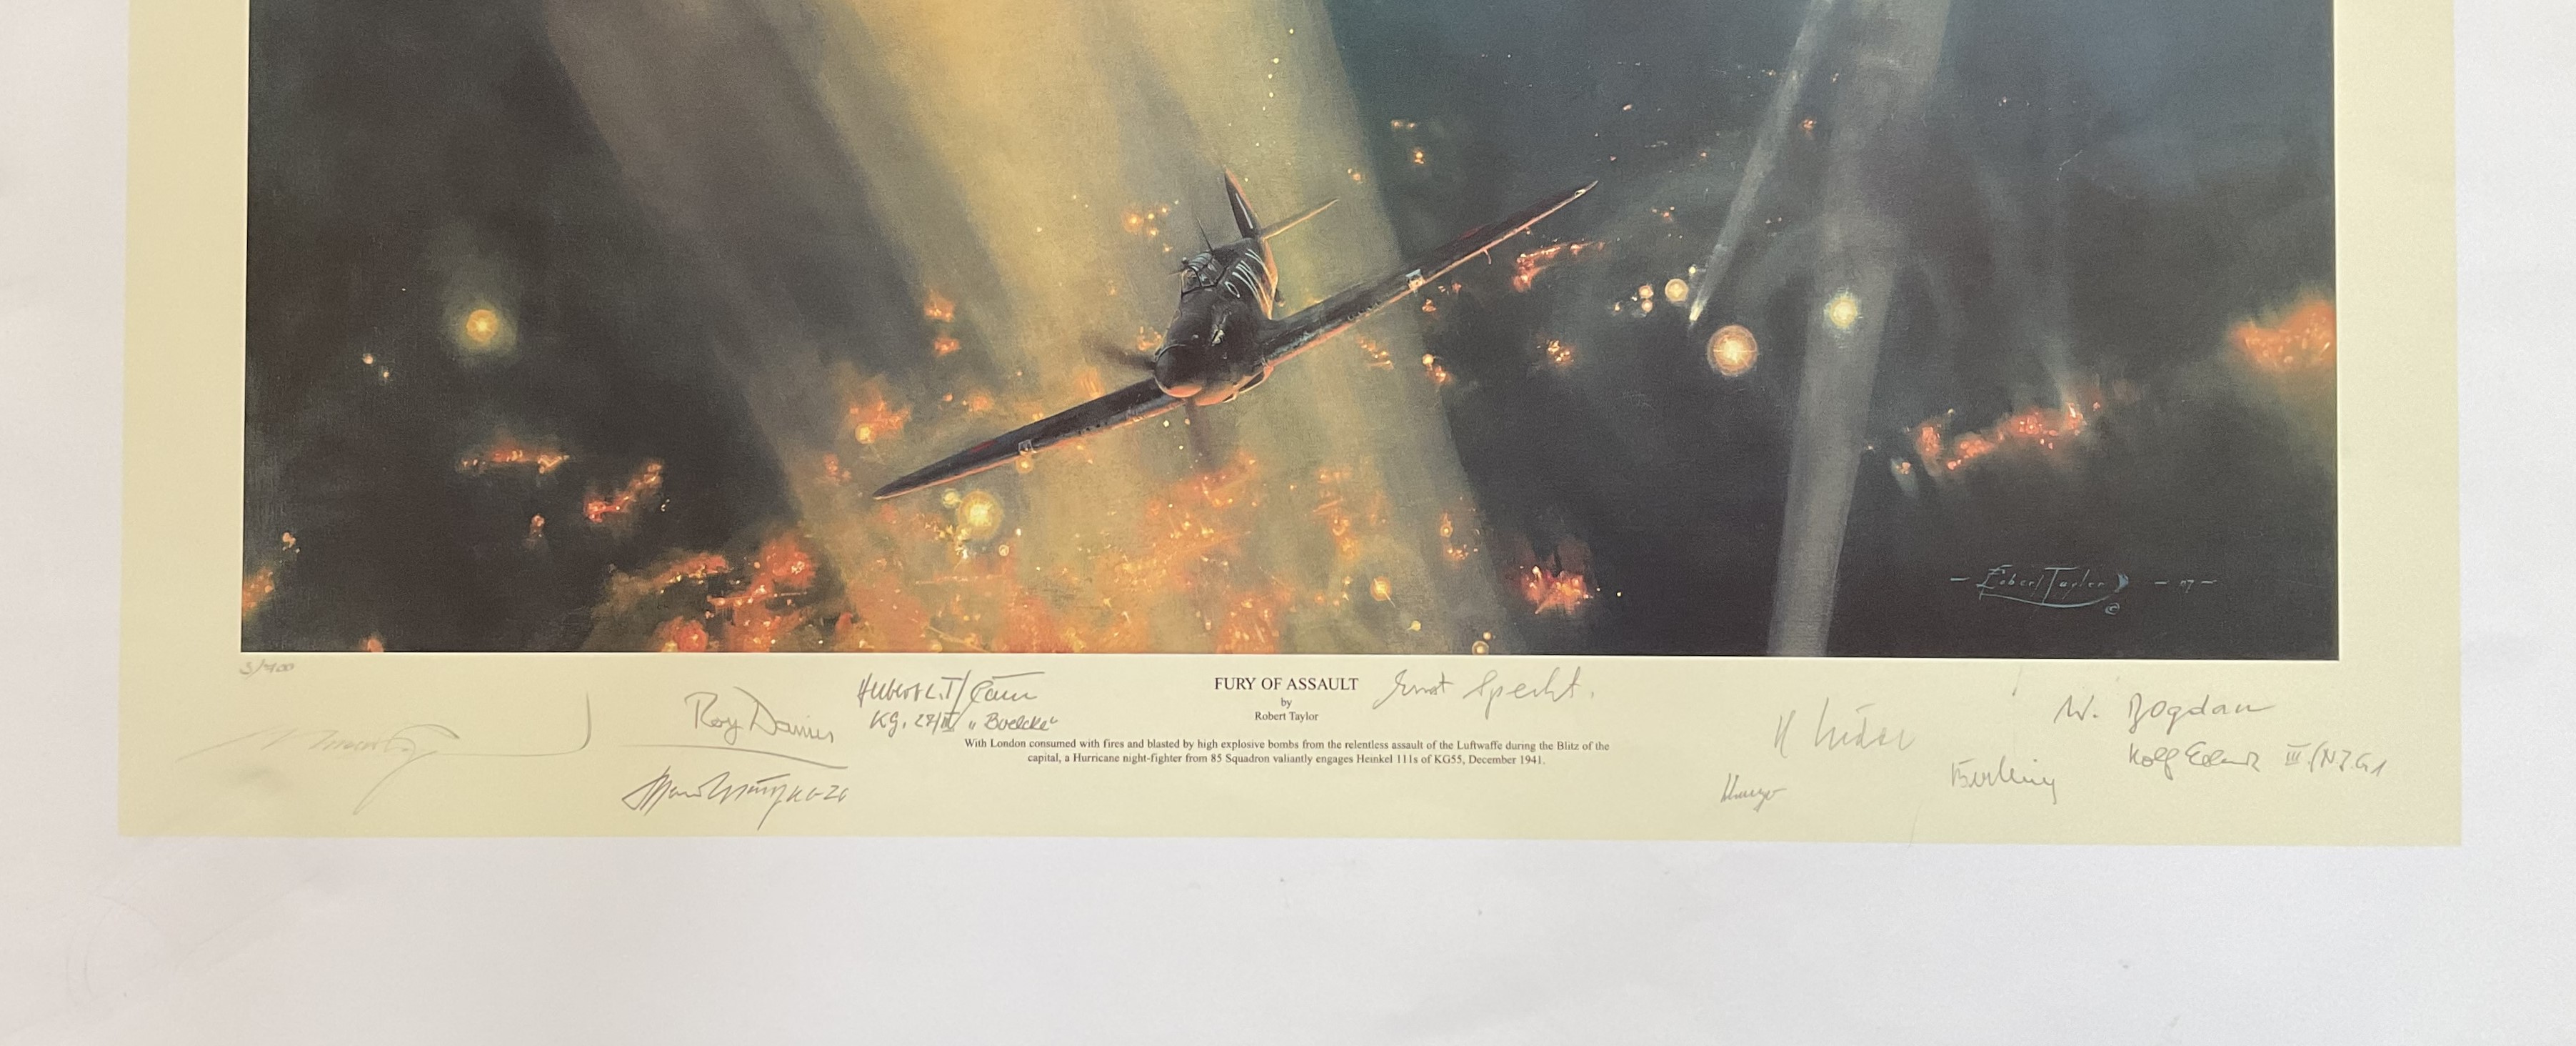 WWII Fury of Assault 29x24 inches colour print limited edition colour print 3/700 signed in pencil - Image 4 of 6